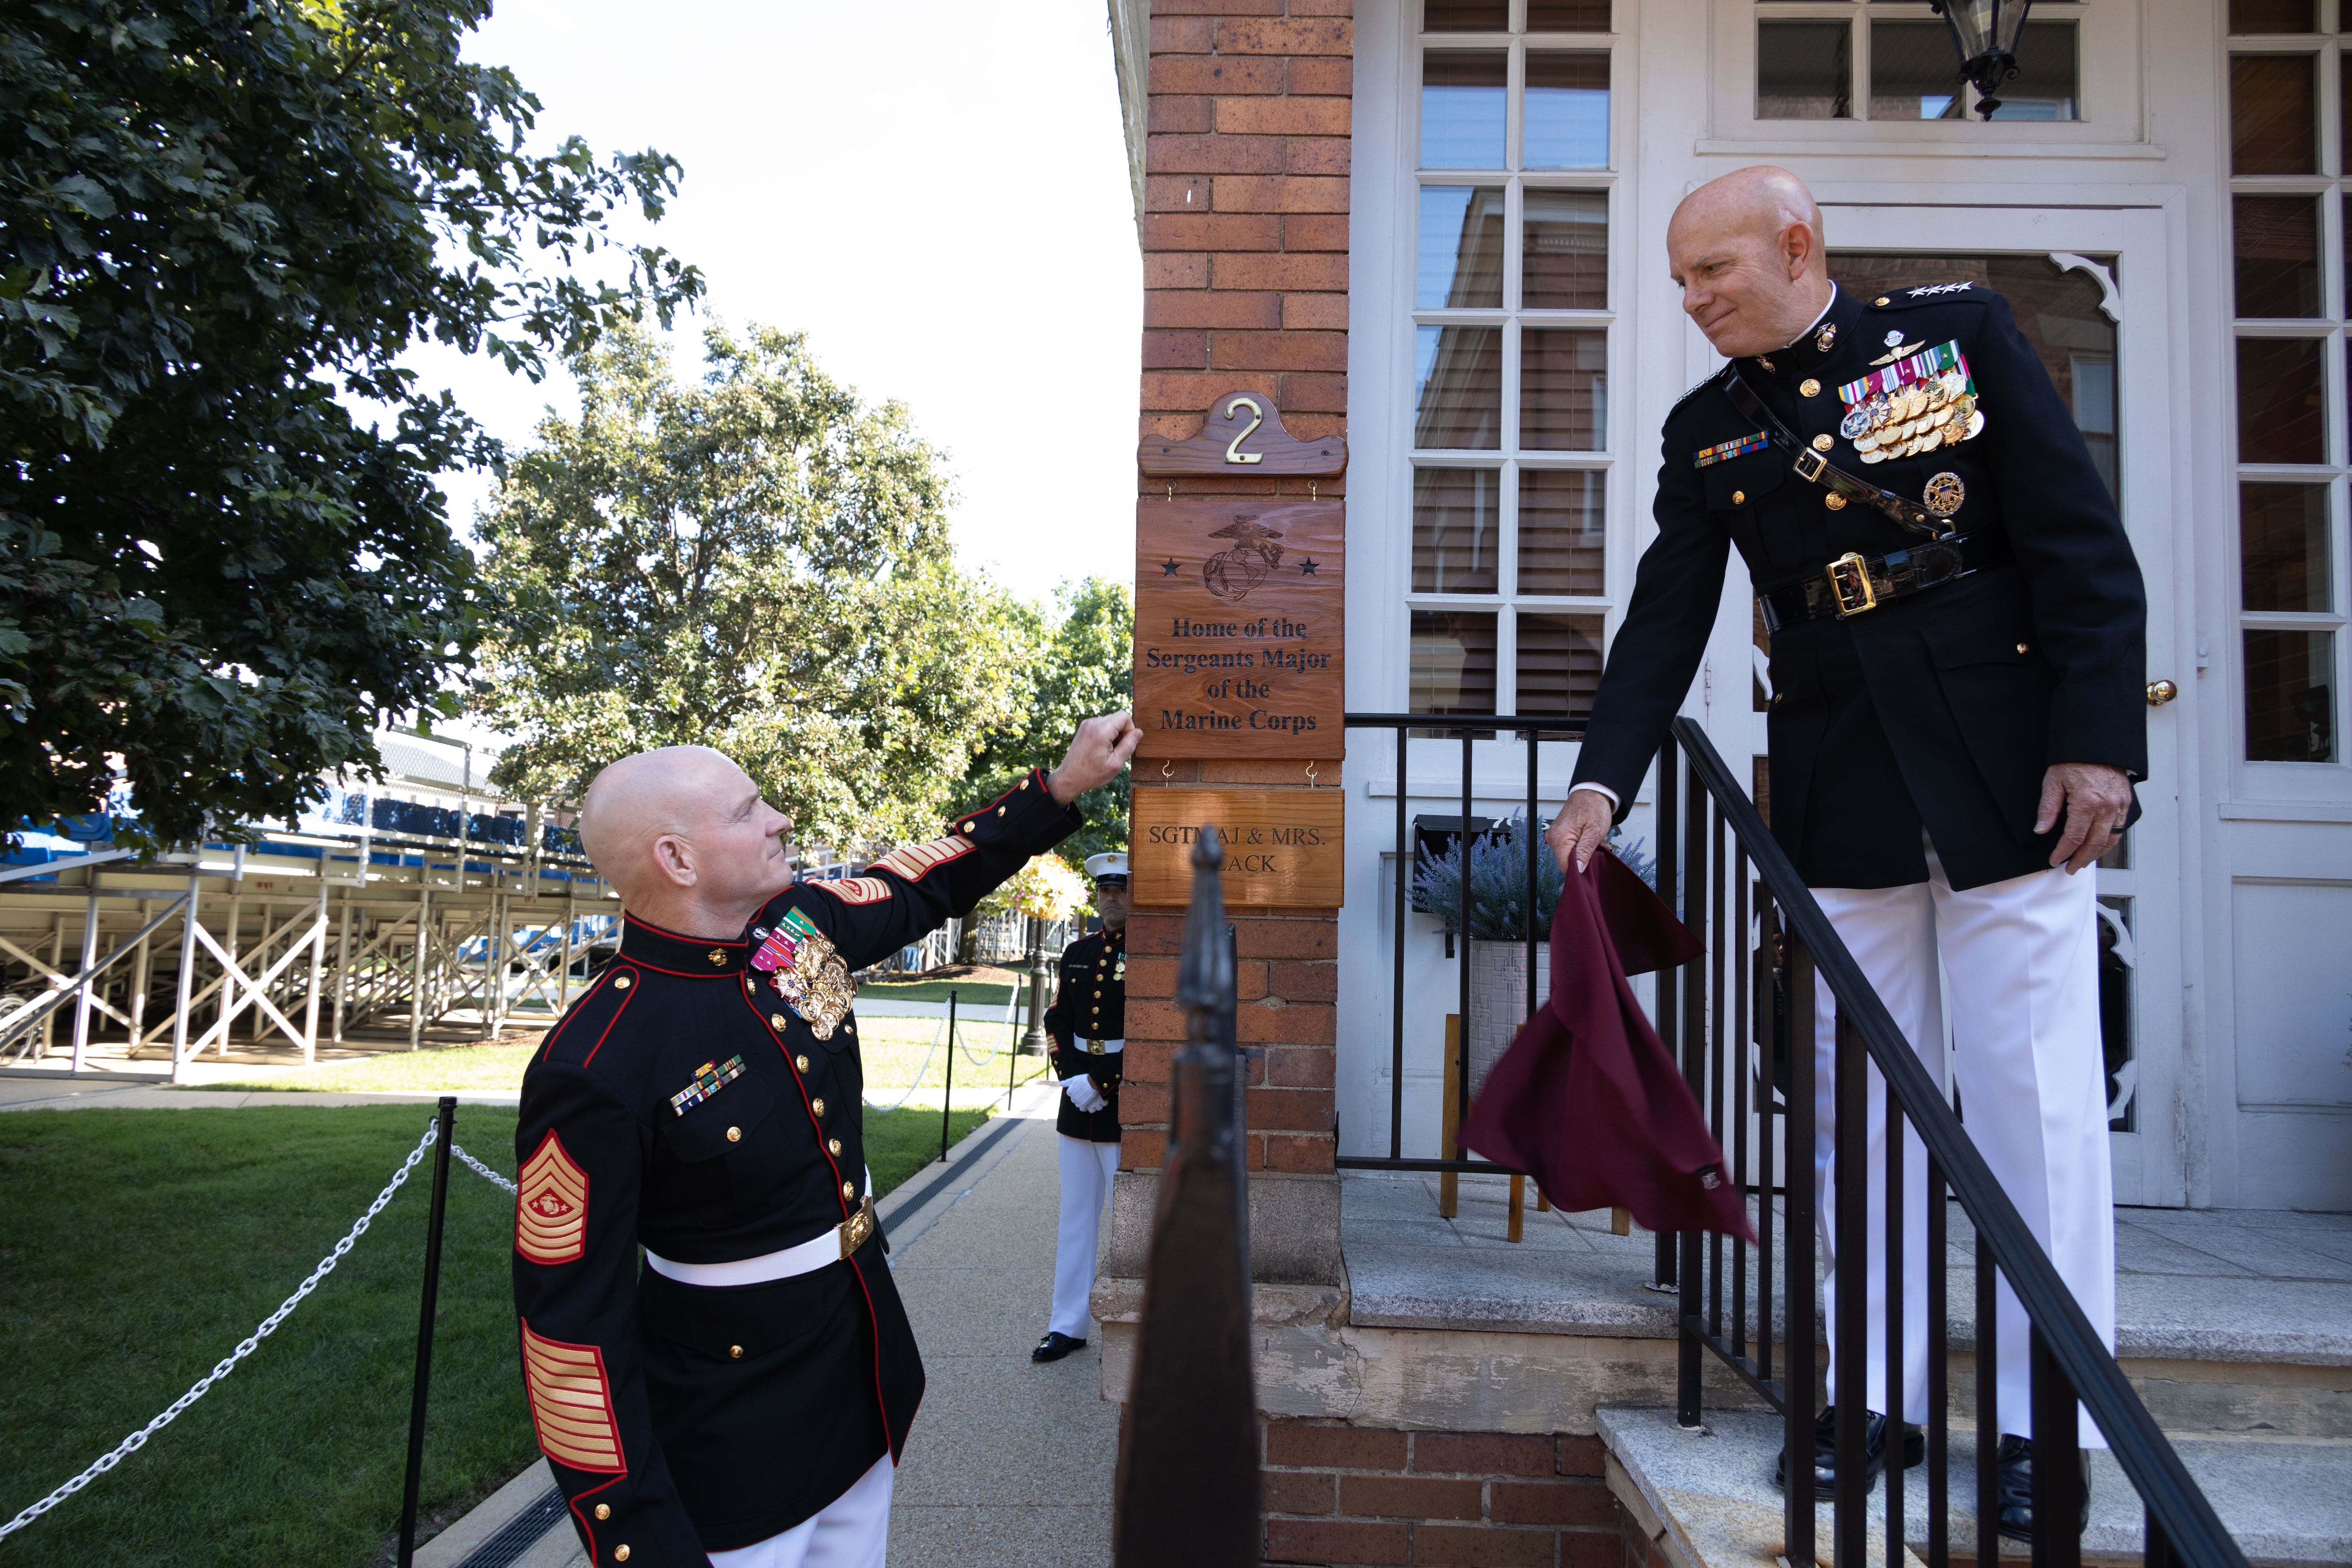 Top enlisted Marine gets an official home at historic DC barracks